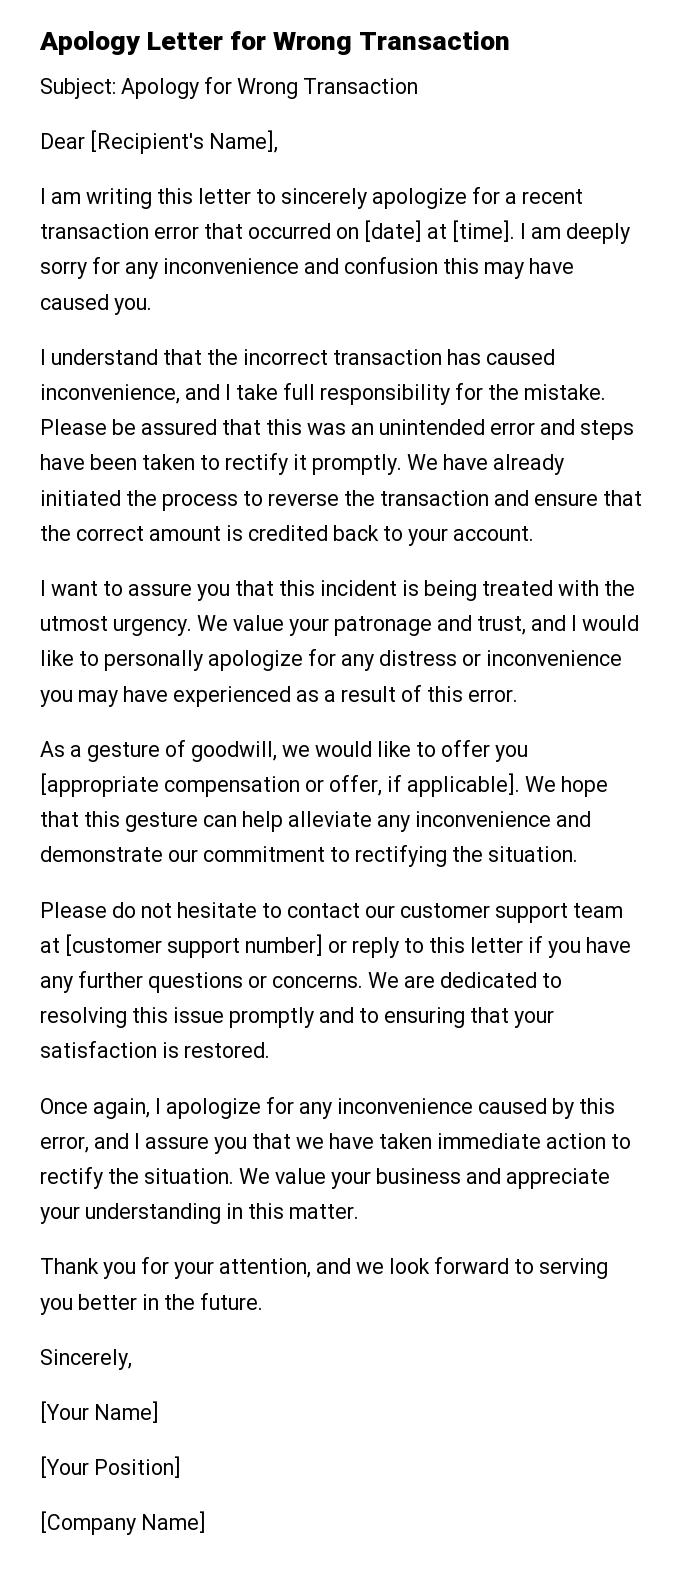 Apology Letter for Wrong Transaction